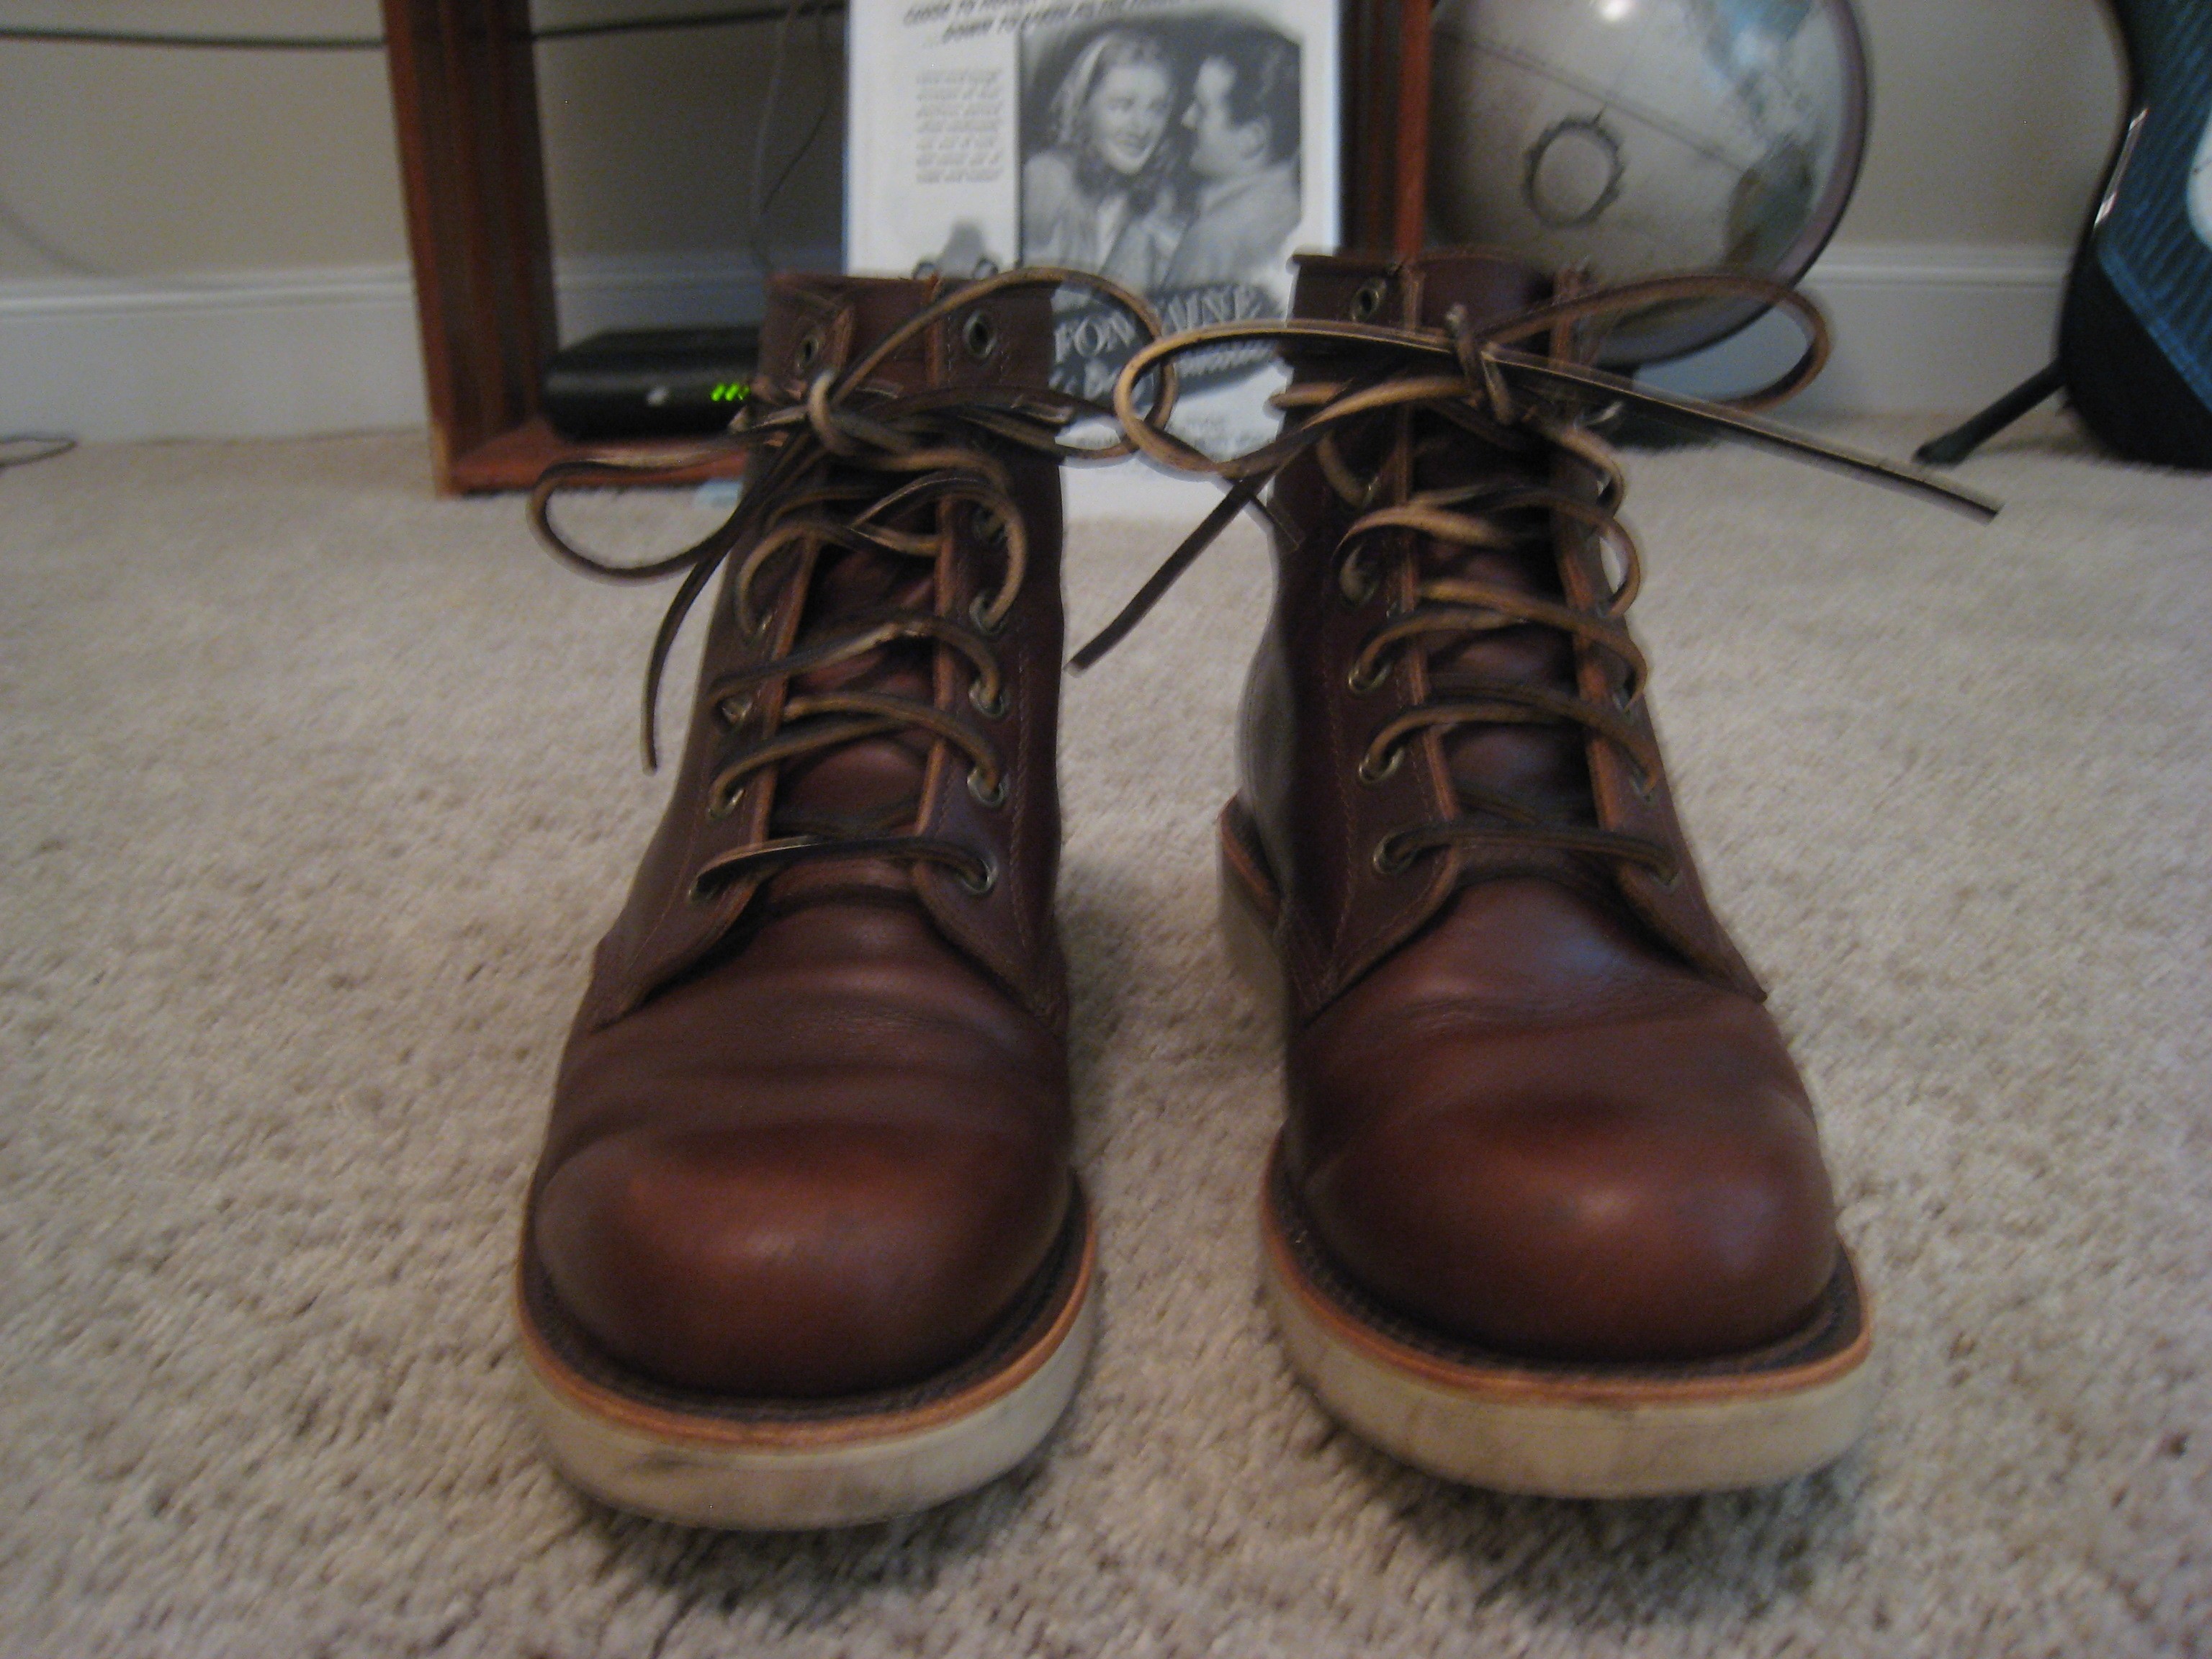 Zappos exclusive Chippewa boots - what do you think? | Styleforum